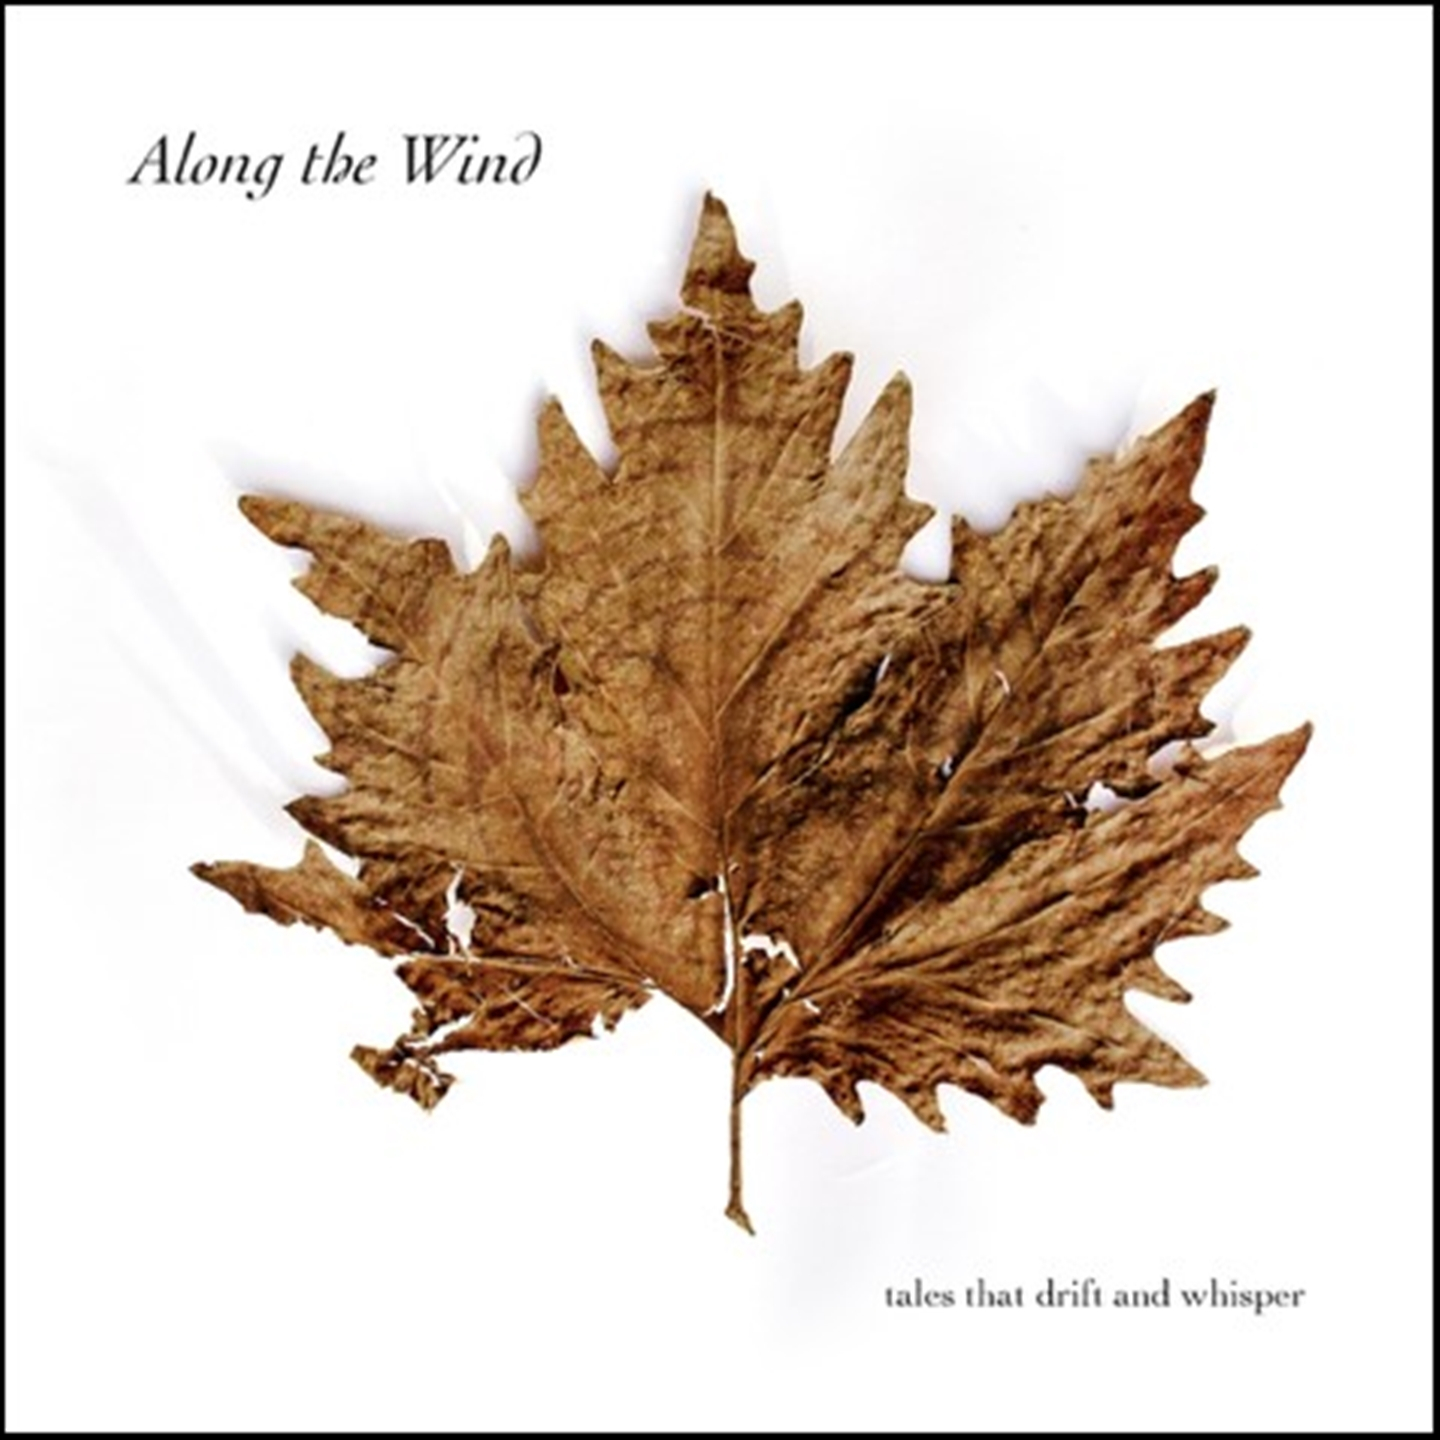 ALONG THE WIND - TALES THAT DRIFT AND WHISPER